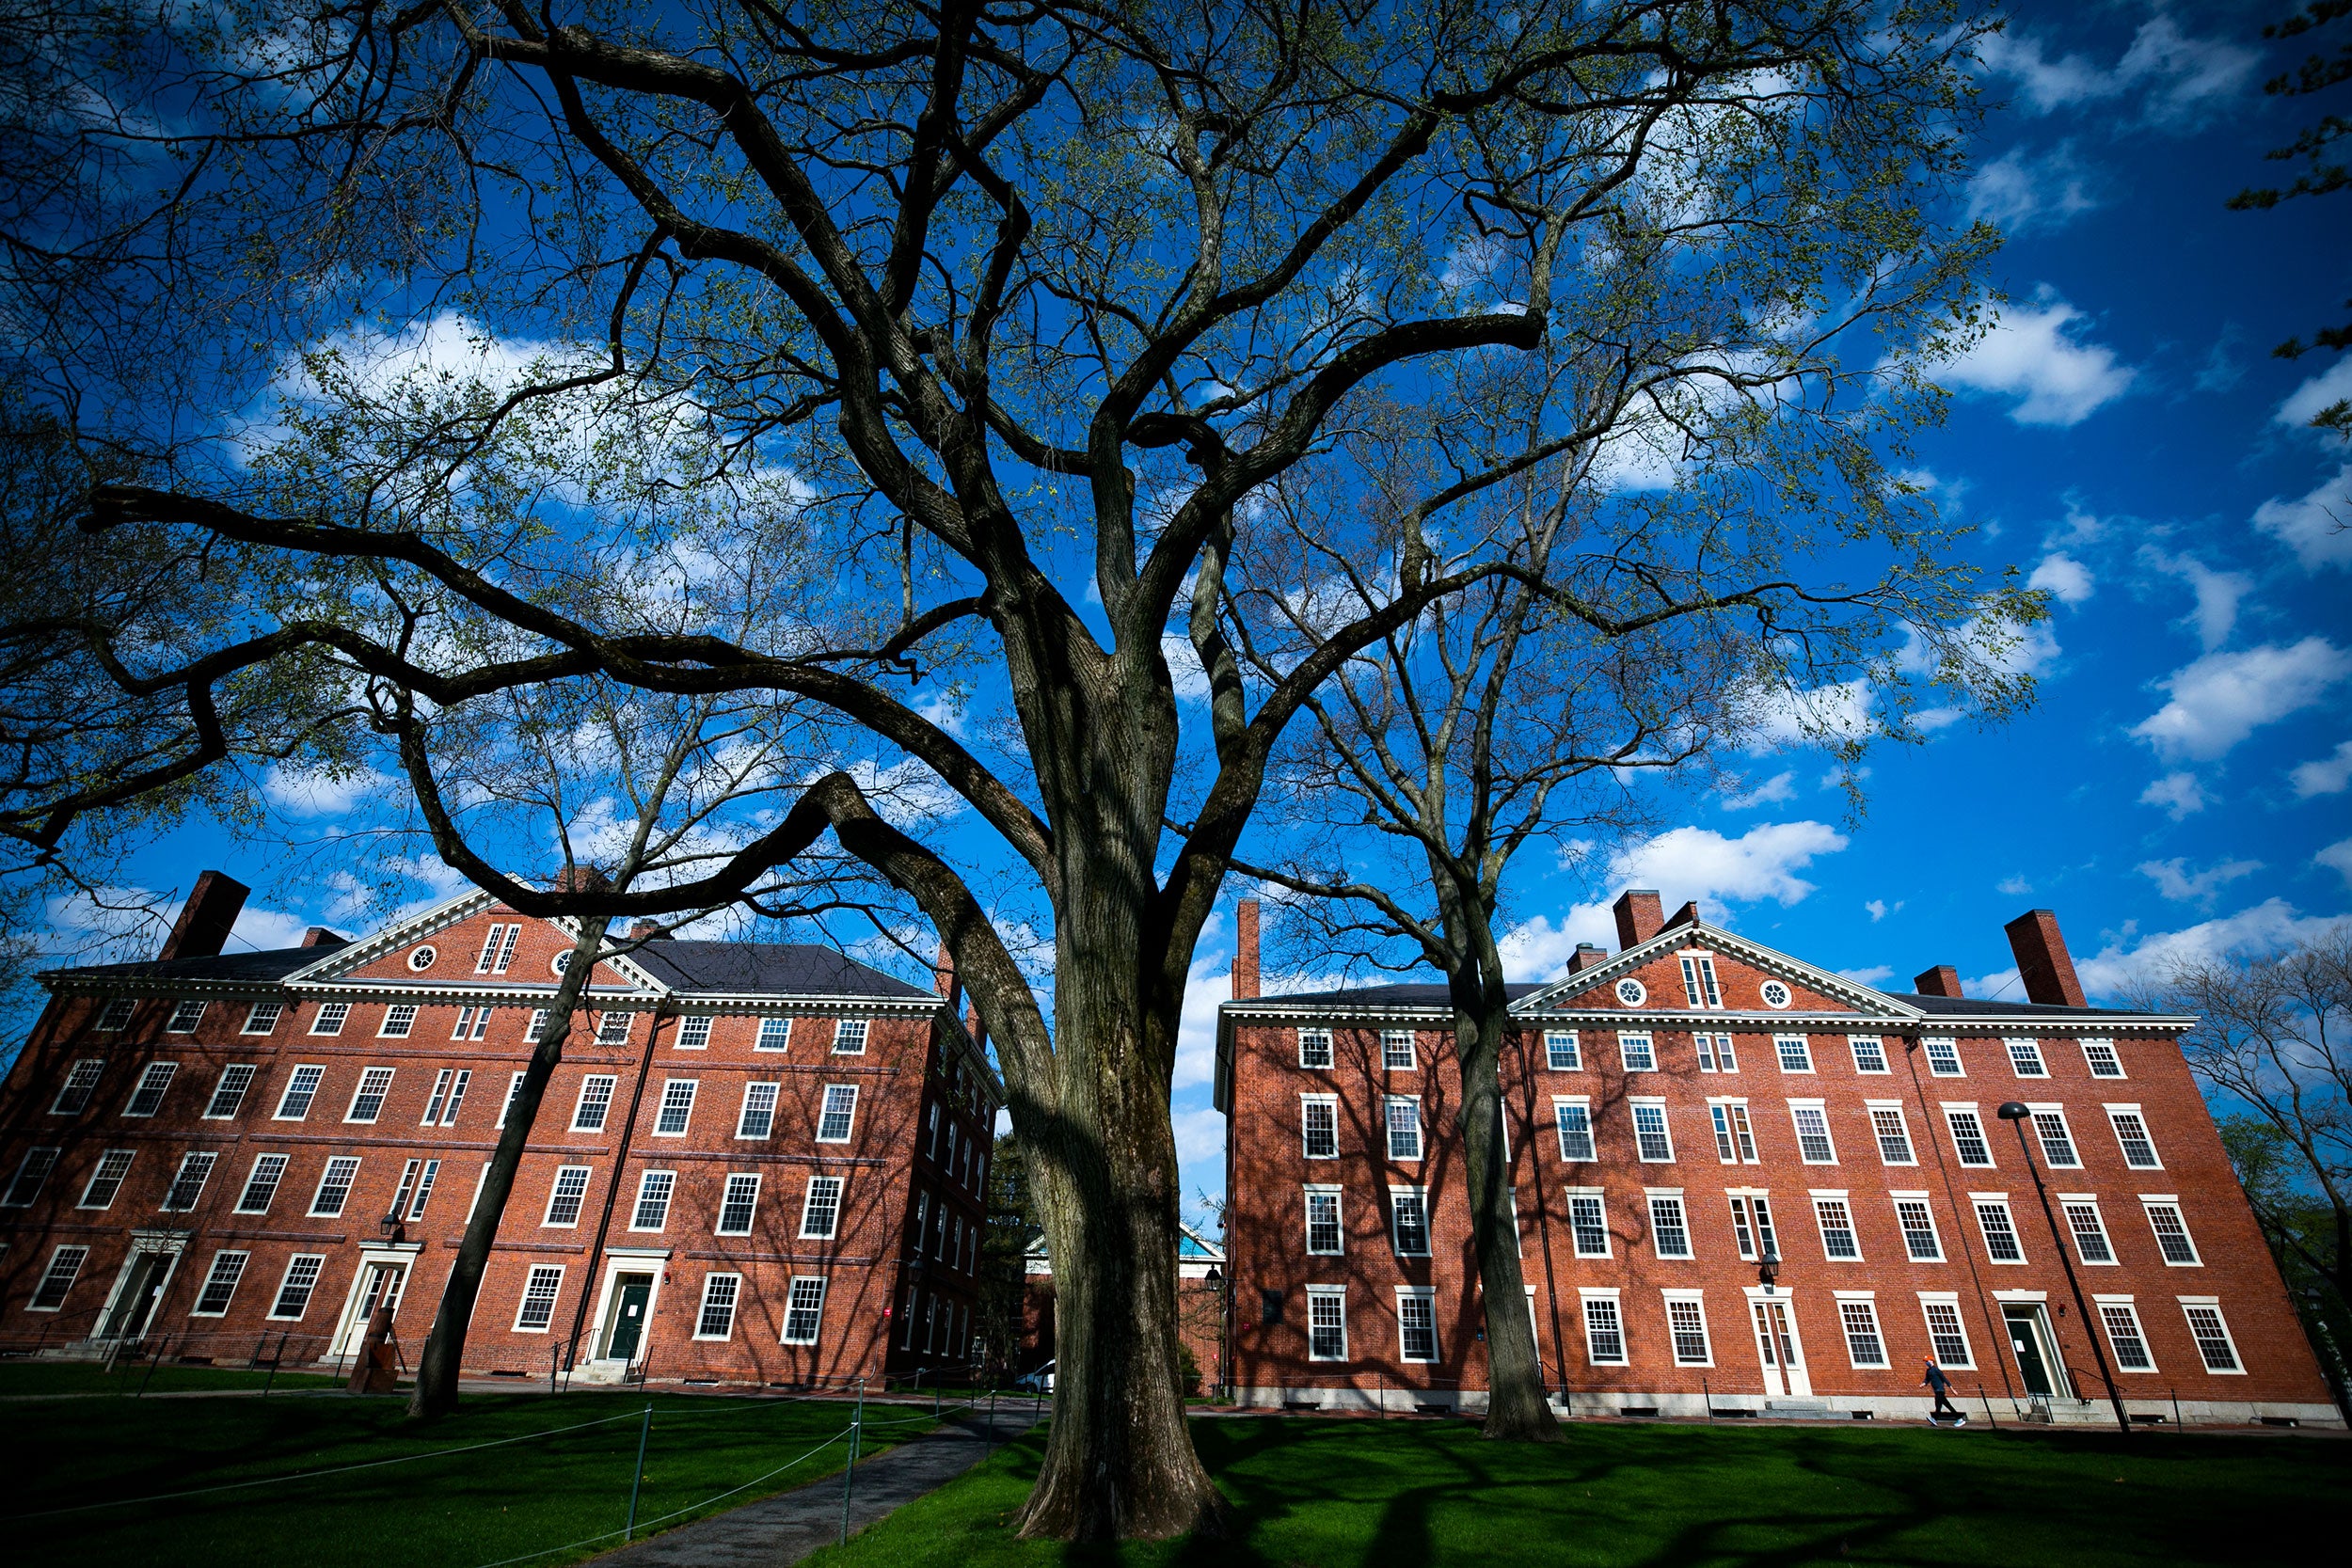 Hollis Hall and Stoughton Hall are pictured in Harvard Yard.